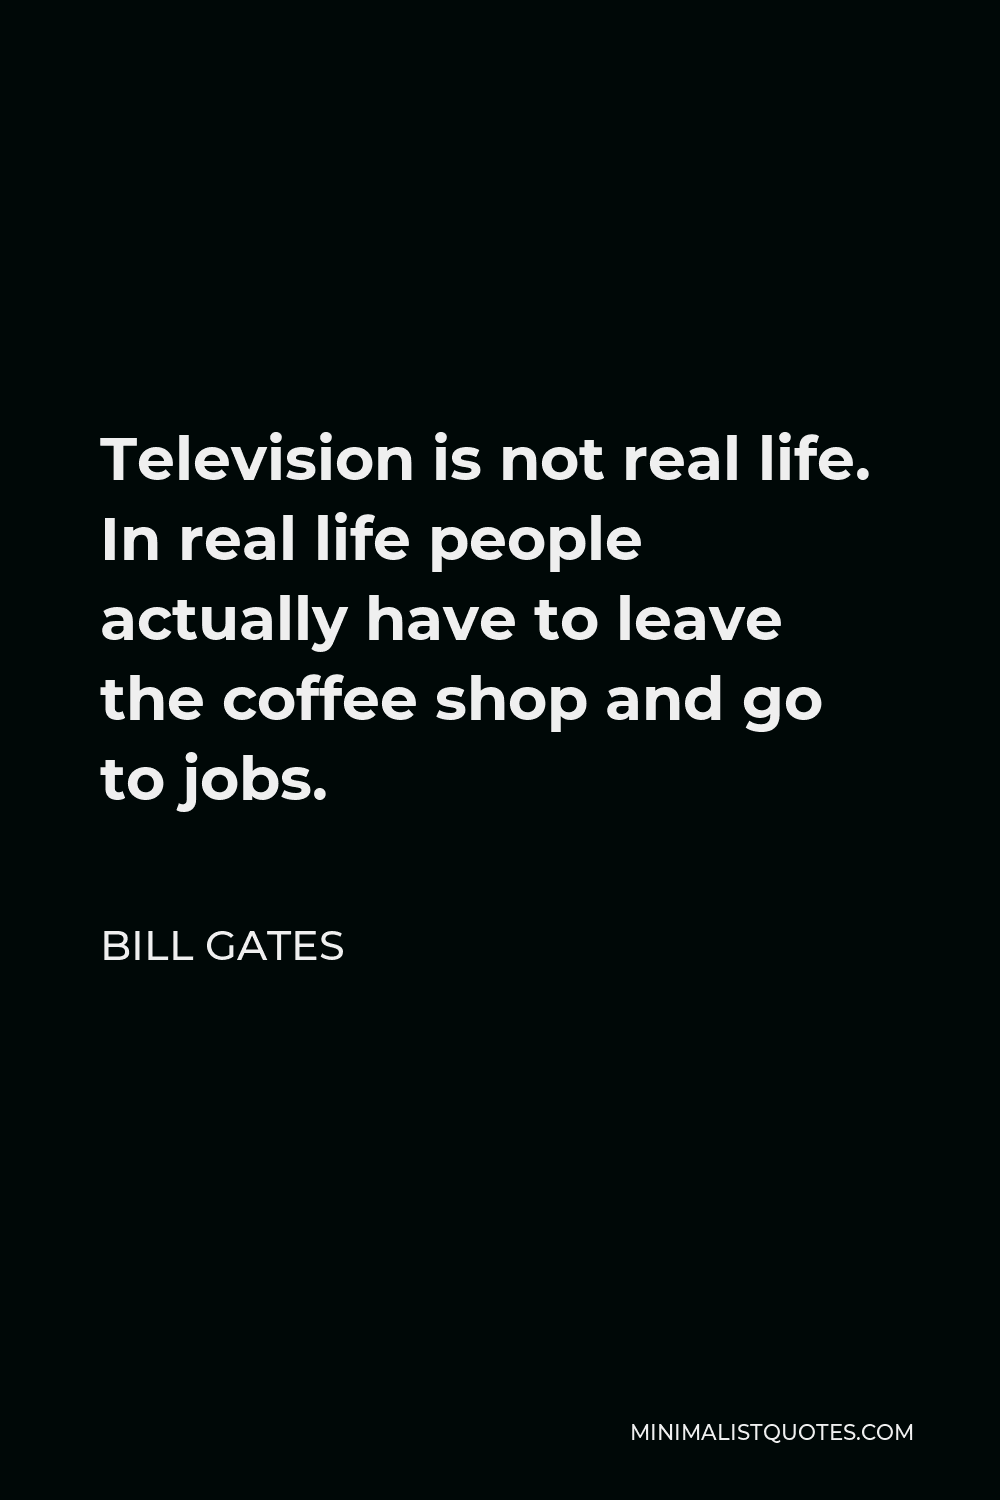 Bill Gates Quote - Television is not real life. In real life people actually have to leave the coffee shop and go to jobs.